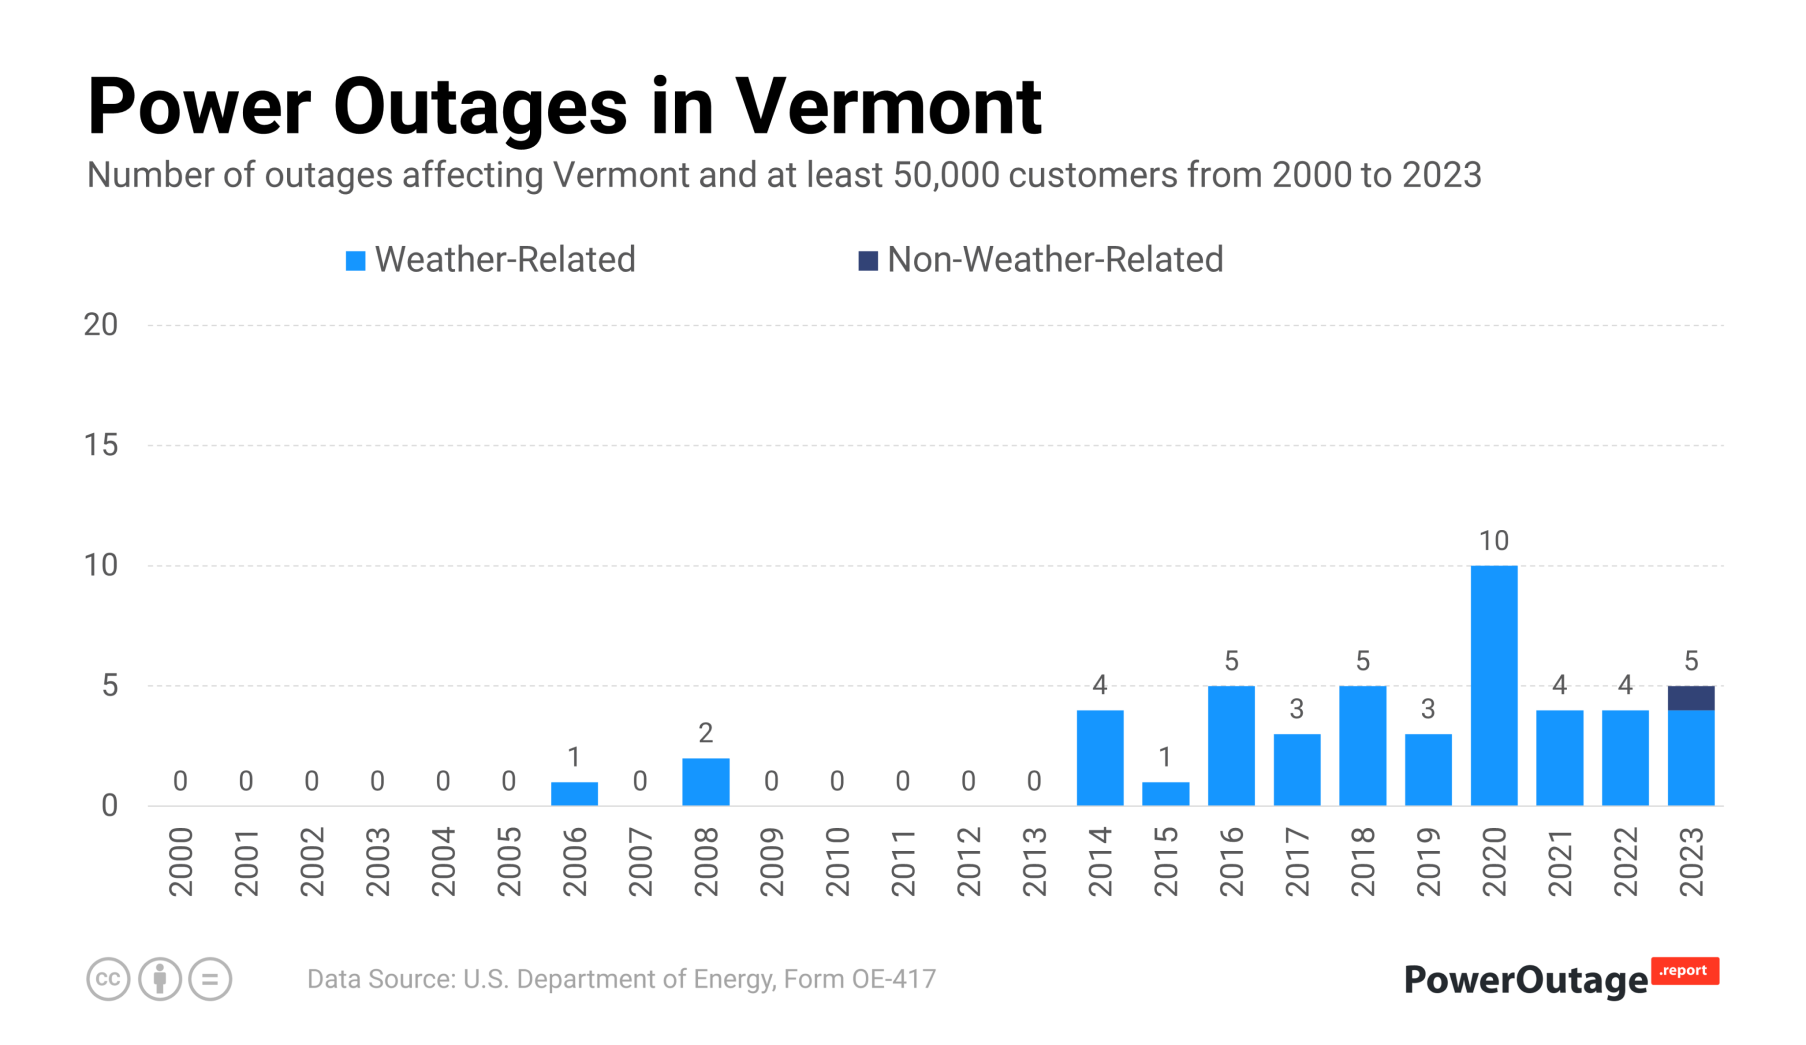 Vermont Power Outage Statistics (2000 - 2021)